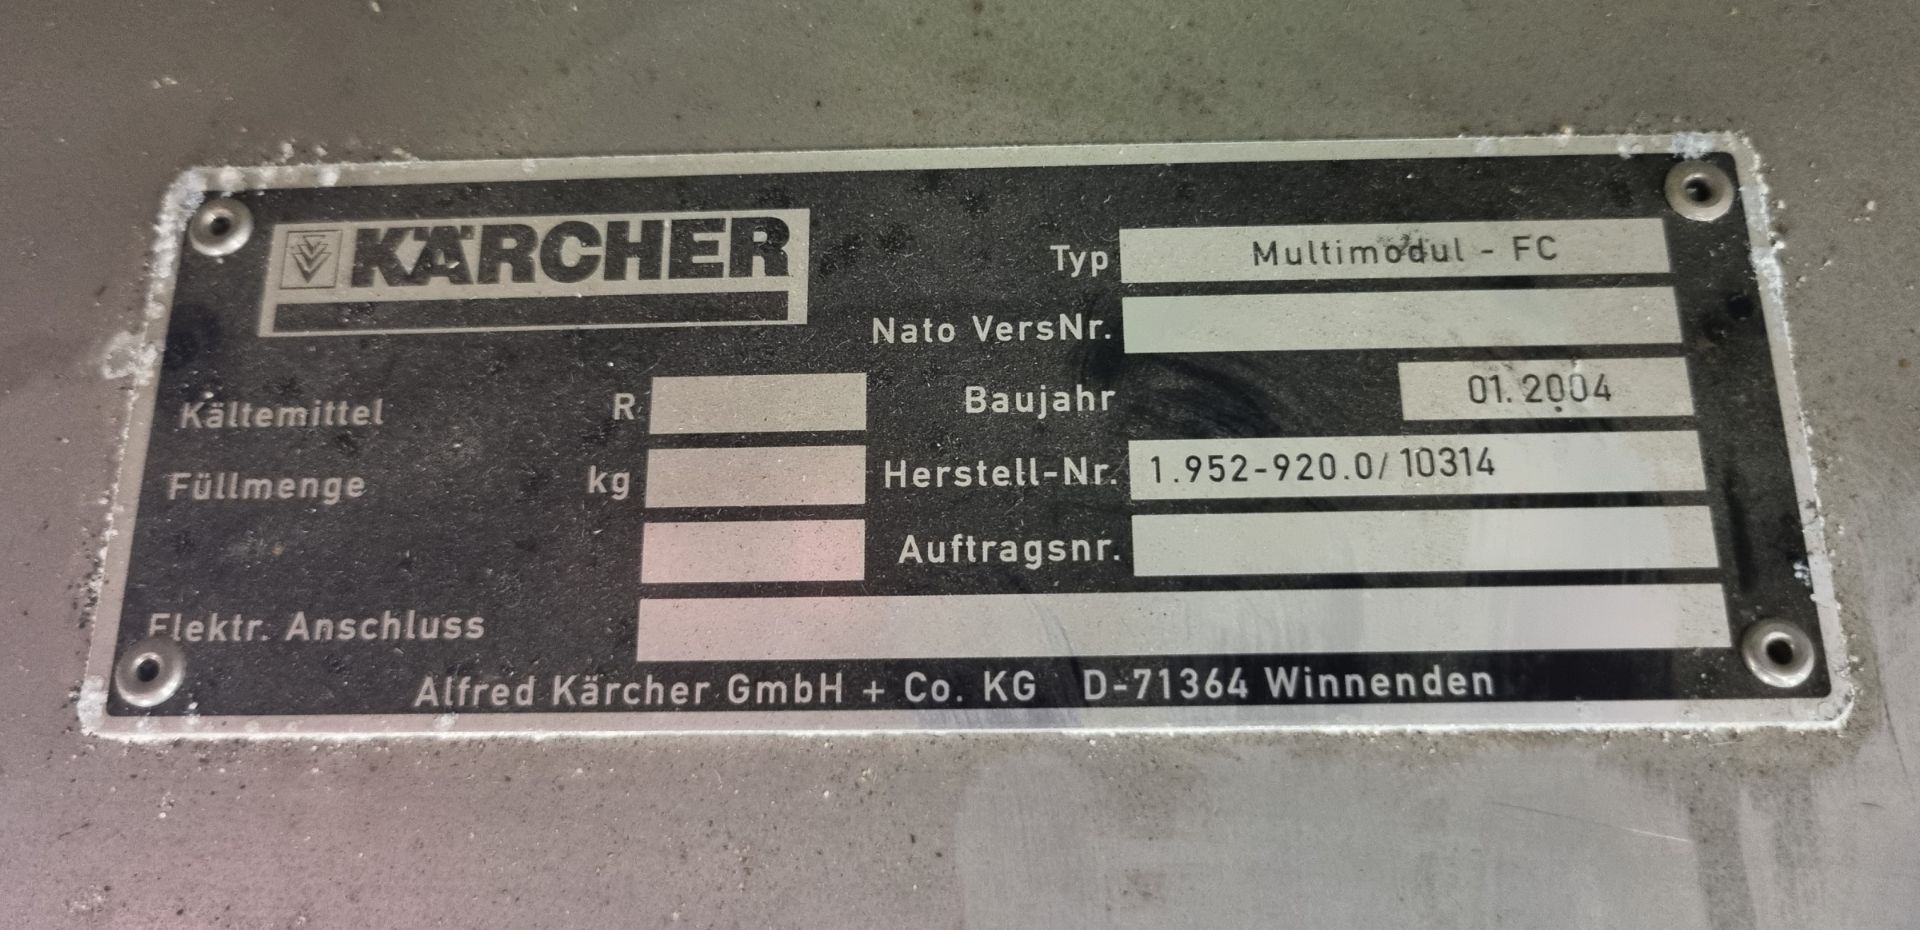 Karcher stainless steel unit - L960 x W670 x H370mm - Image 4 of 4